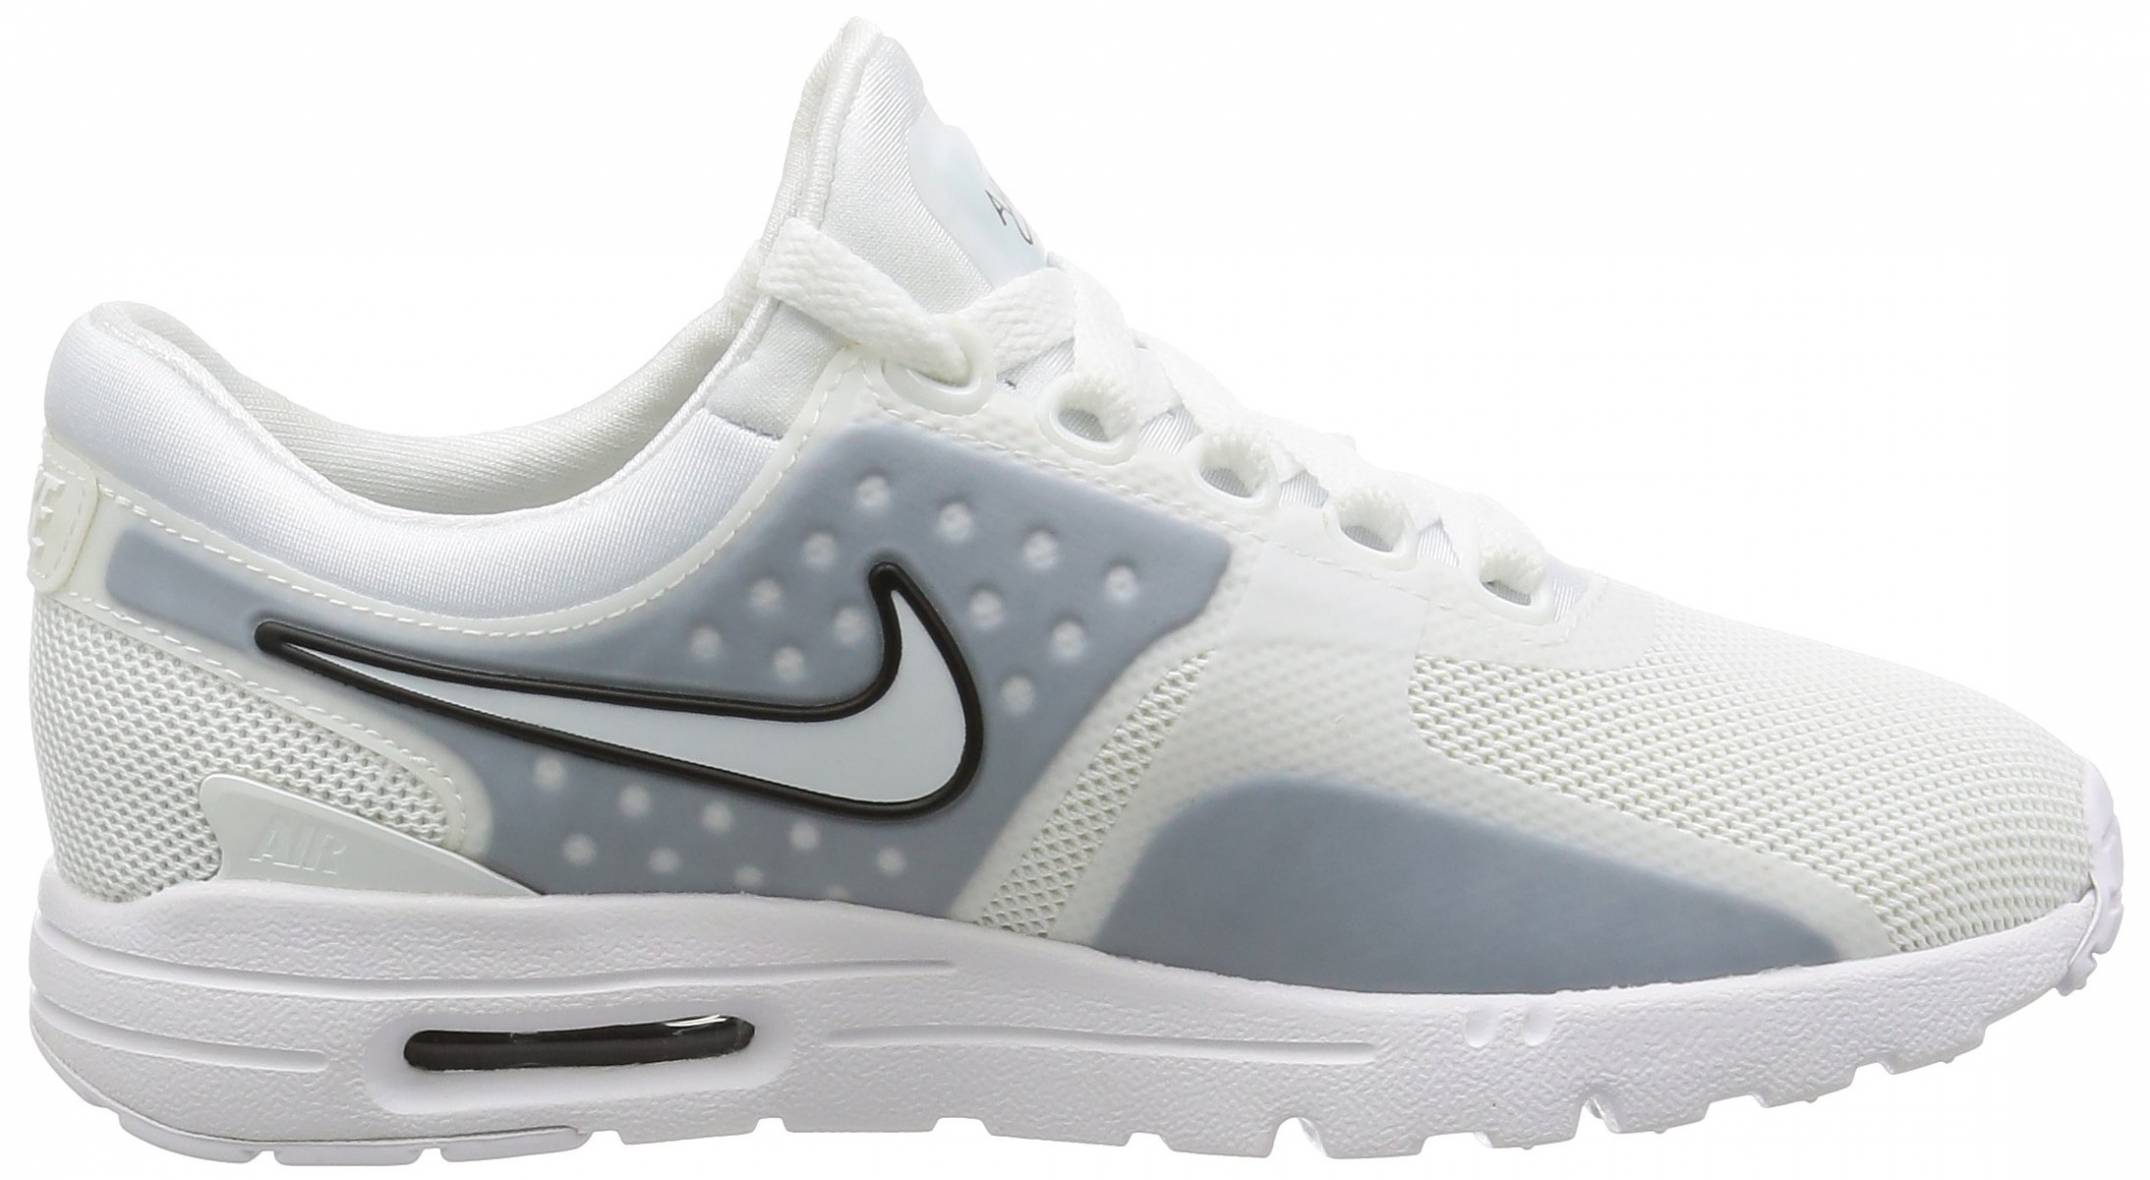 Nike Air Max Zero sneakers (only $110 